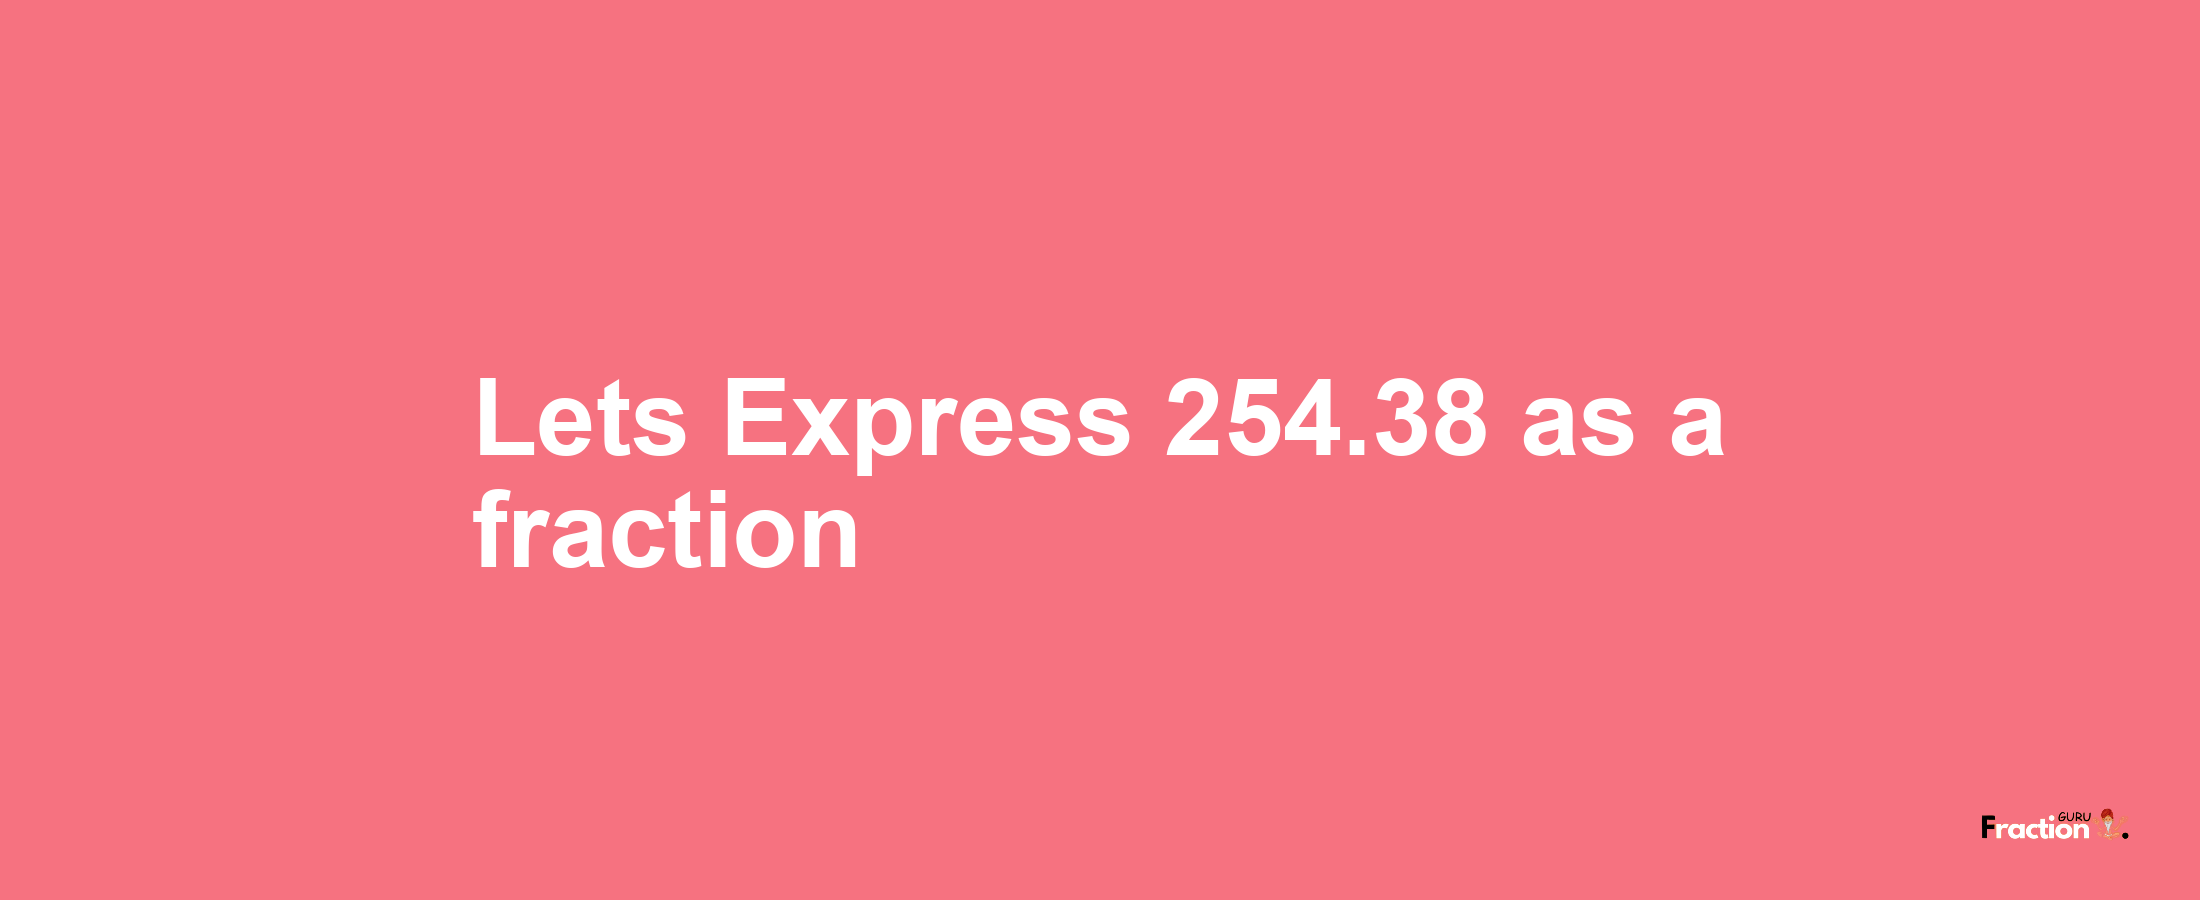 Lets Express 254.38 as afraction